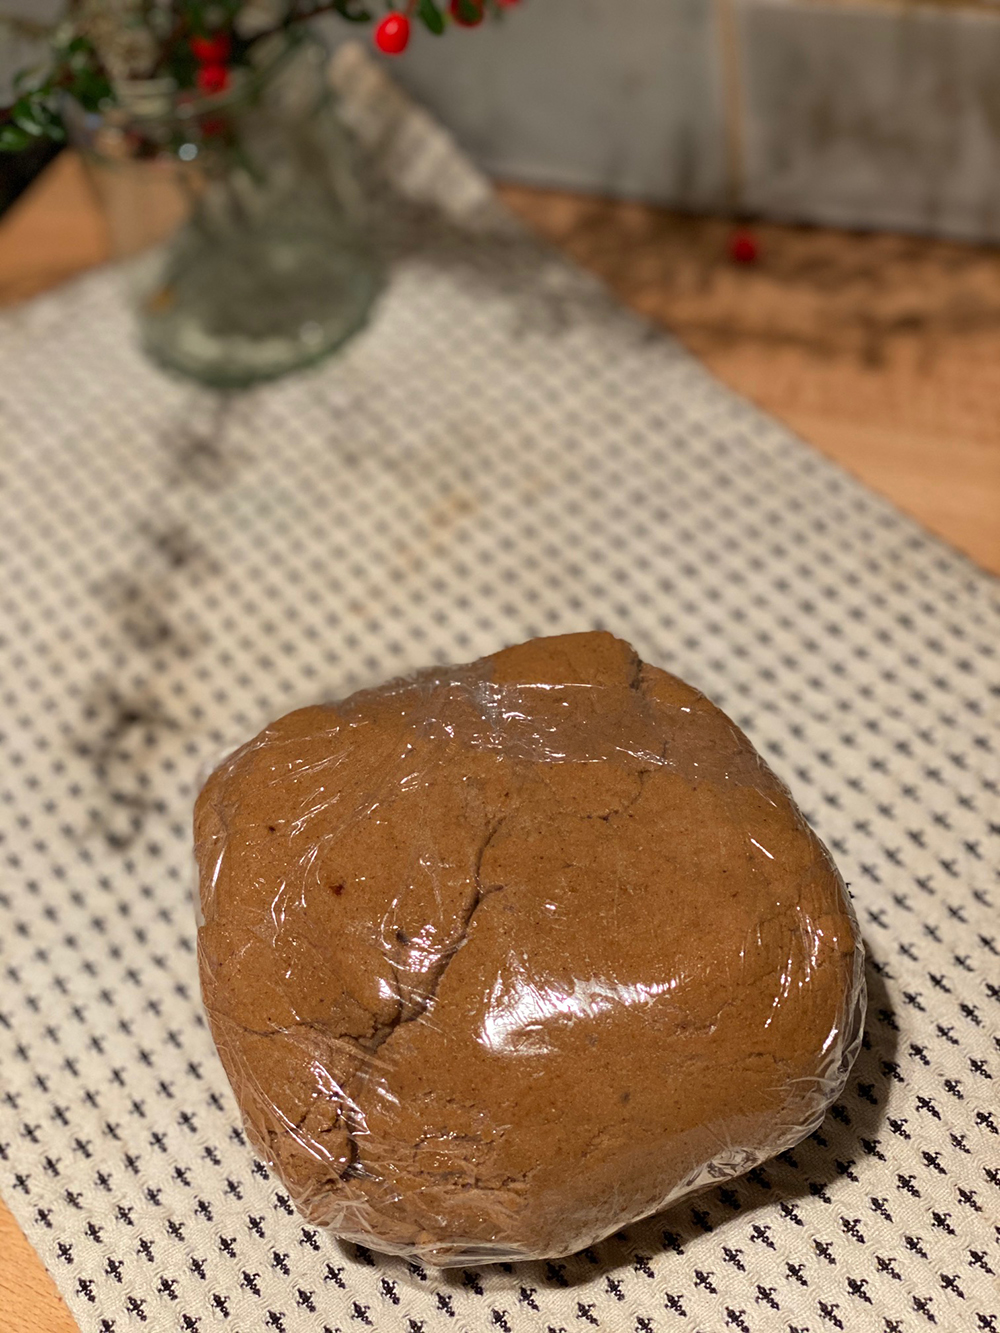 A ball of light brown biscuit mixture rests in cling-film.